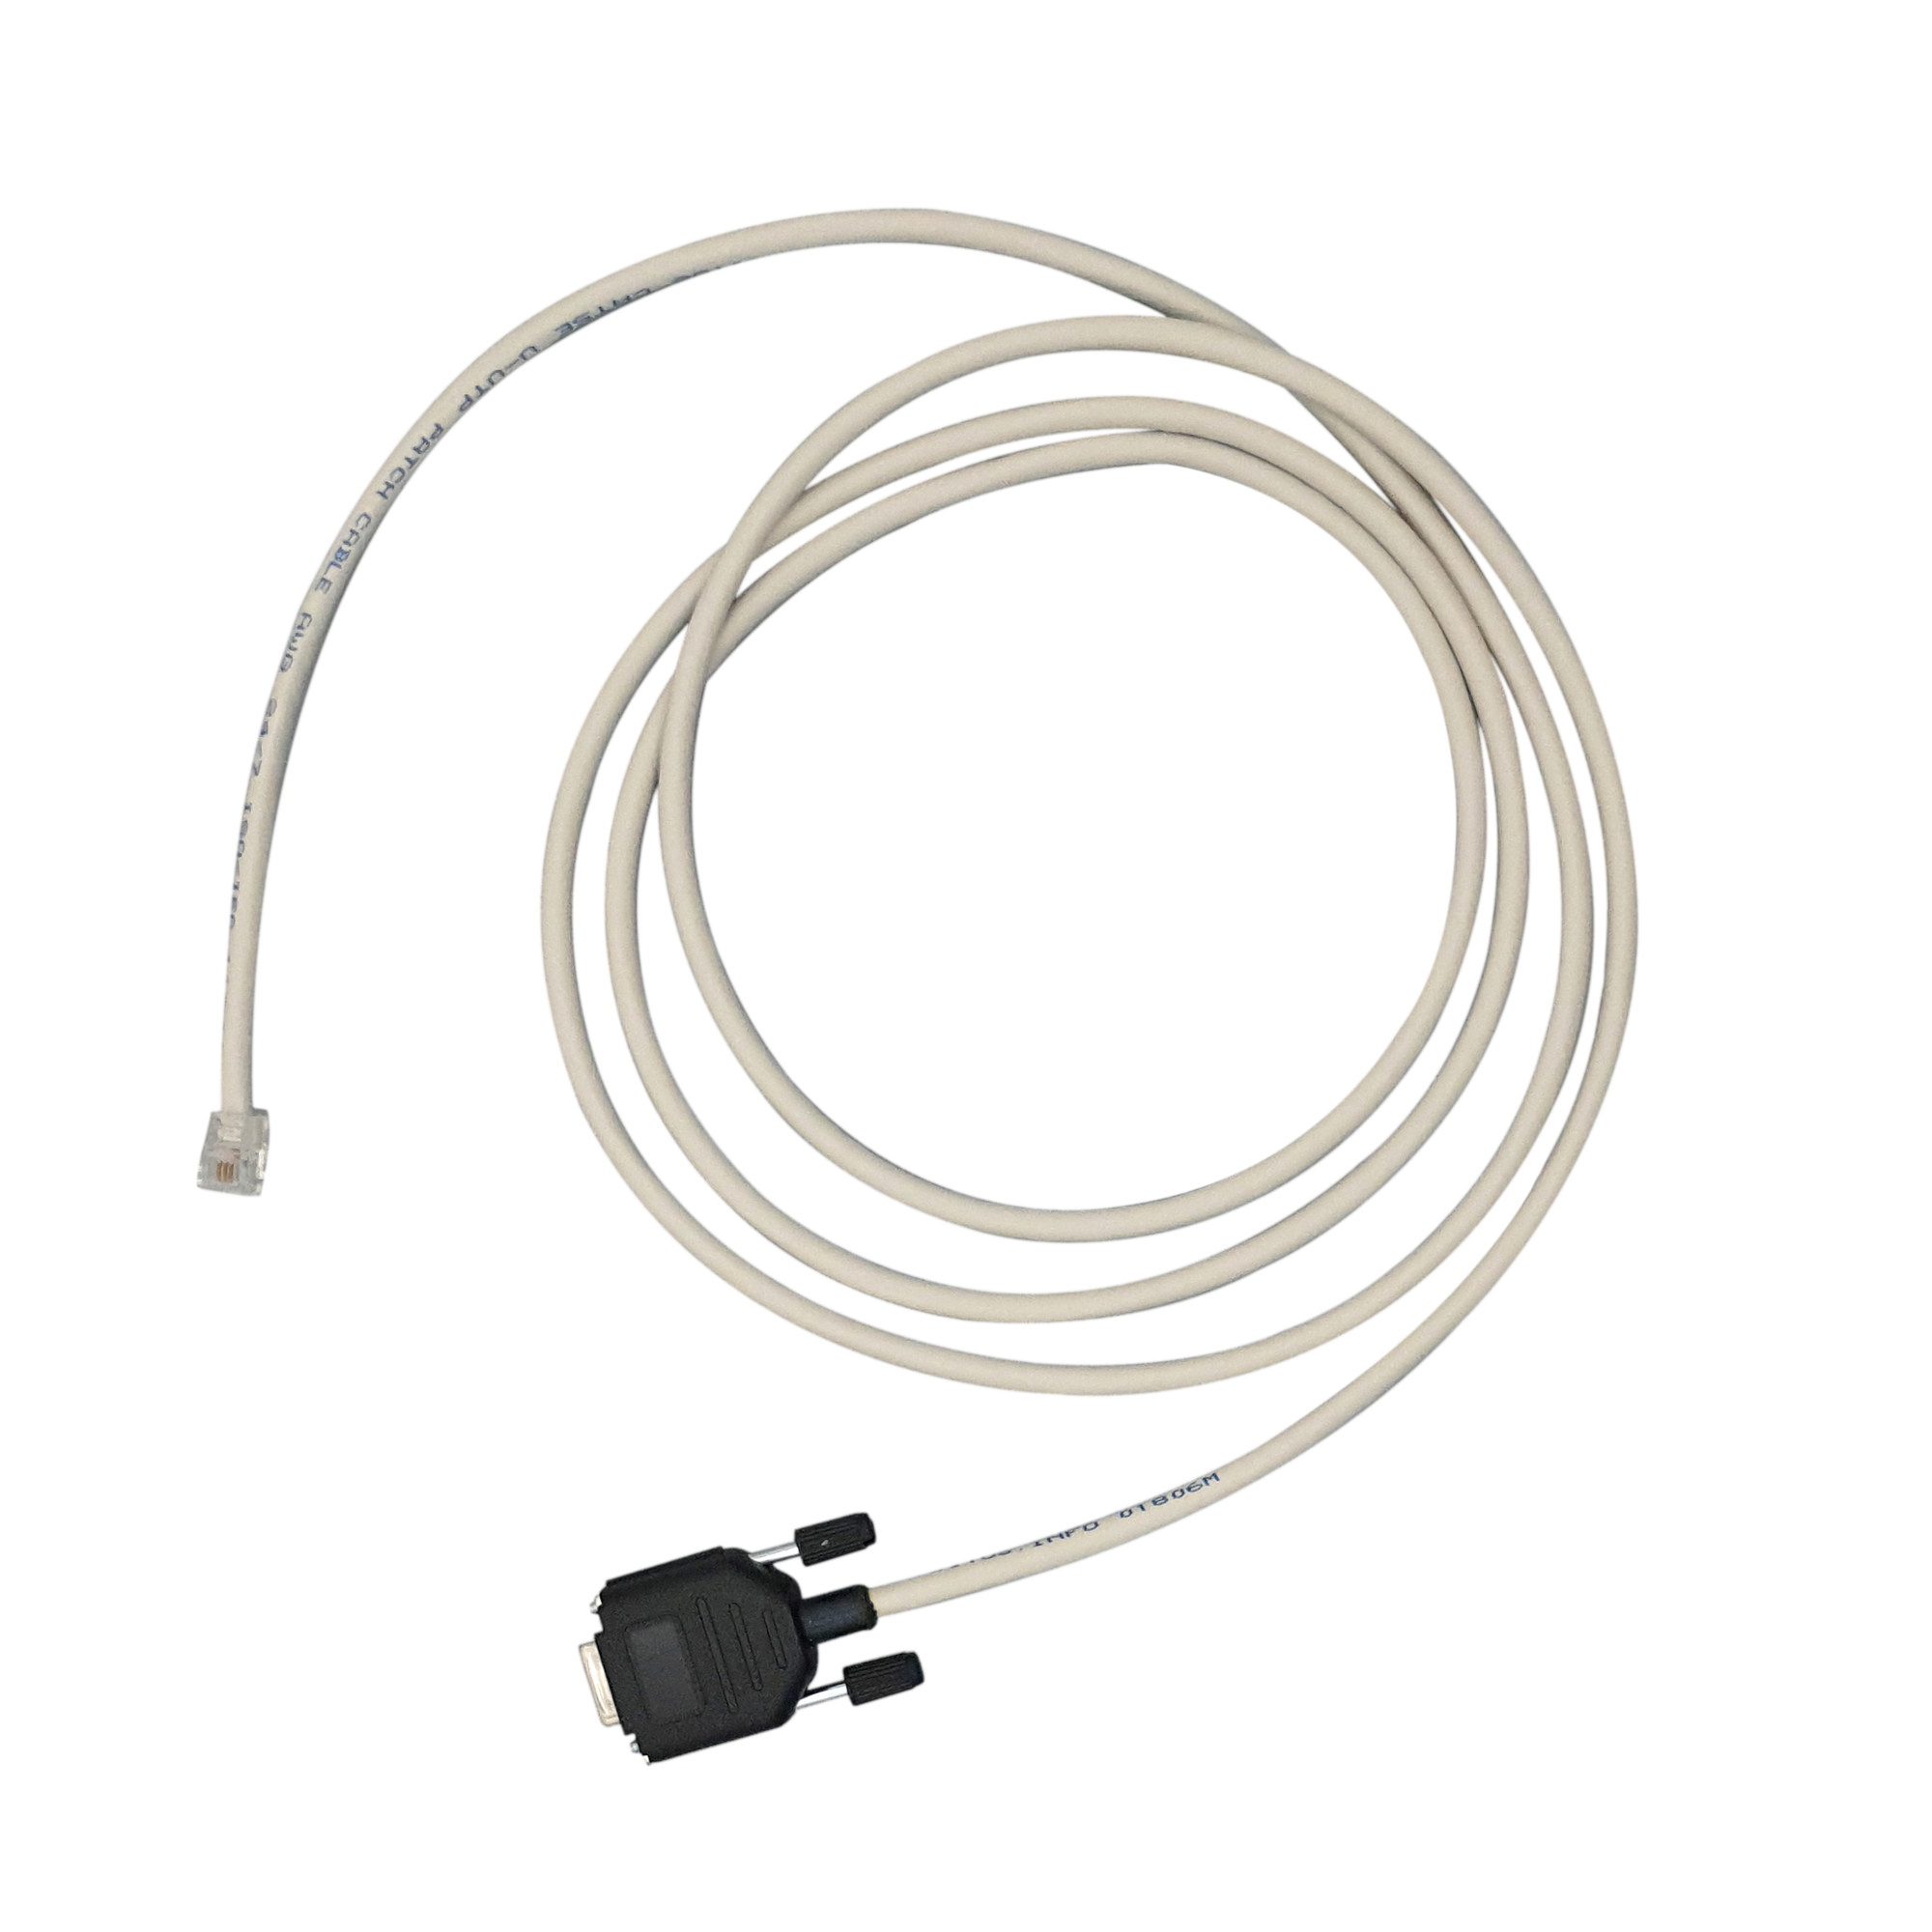 Serial connection cable (RS-485) for Kinco CV20 frequency converter and Kinco HMI